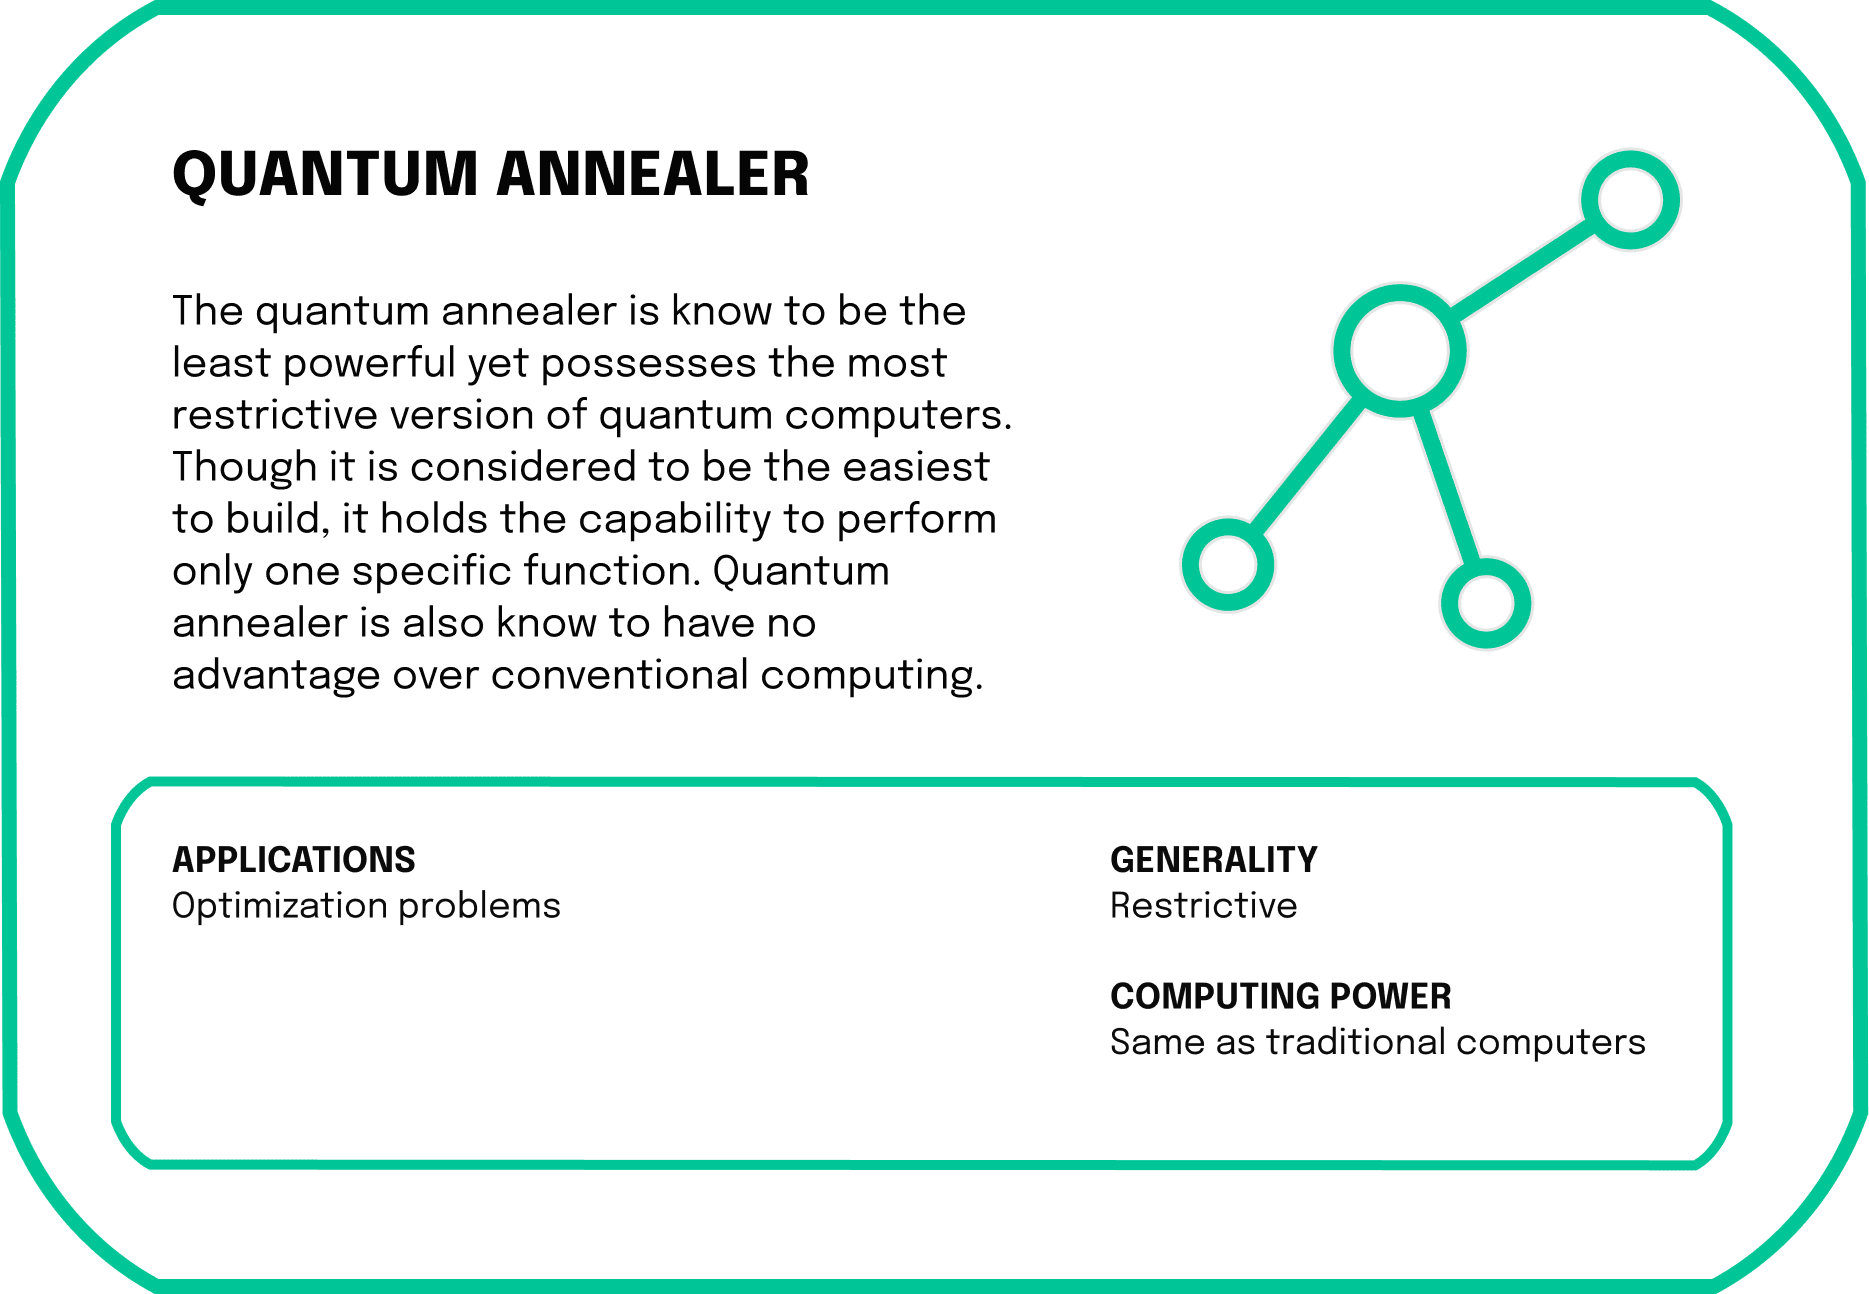 The quantum annealer is known to be the least powerful yet possesses the most restrictive version of quantum computers. Though it is considered to be the easiest to build, it holds the capability to perform only one specific function.